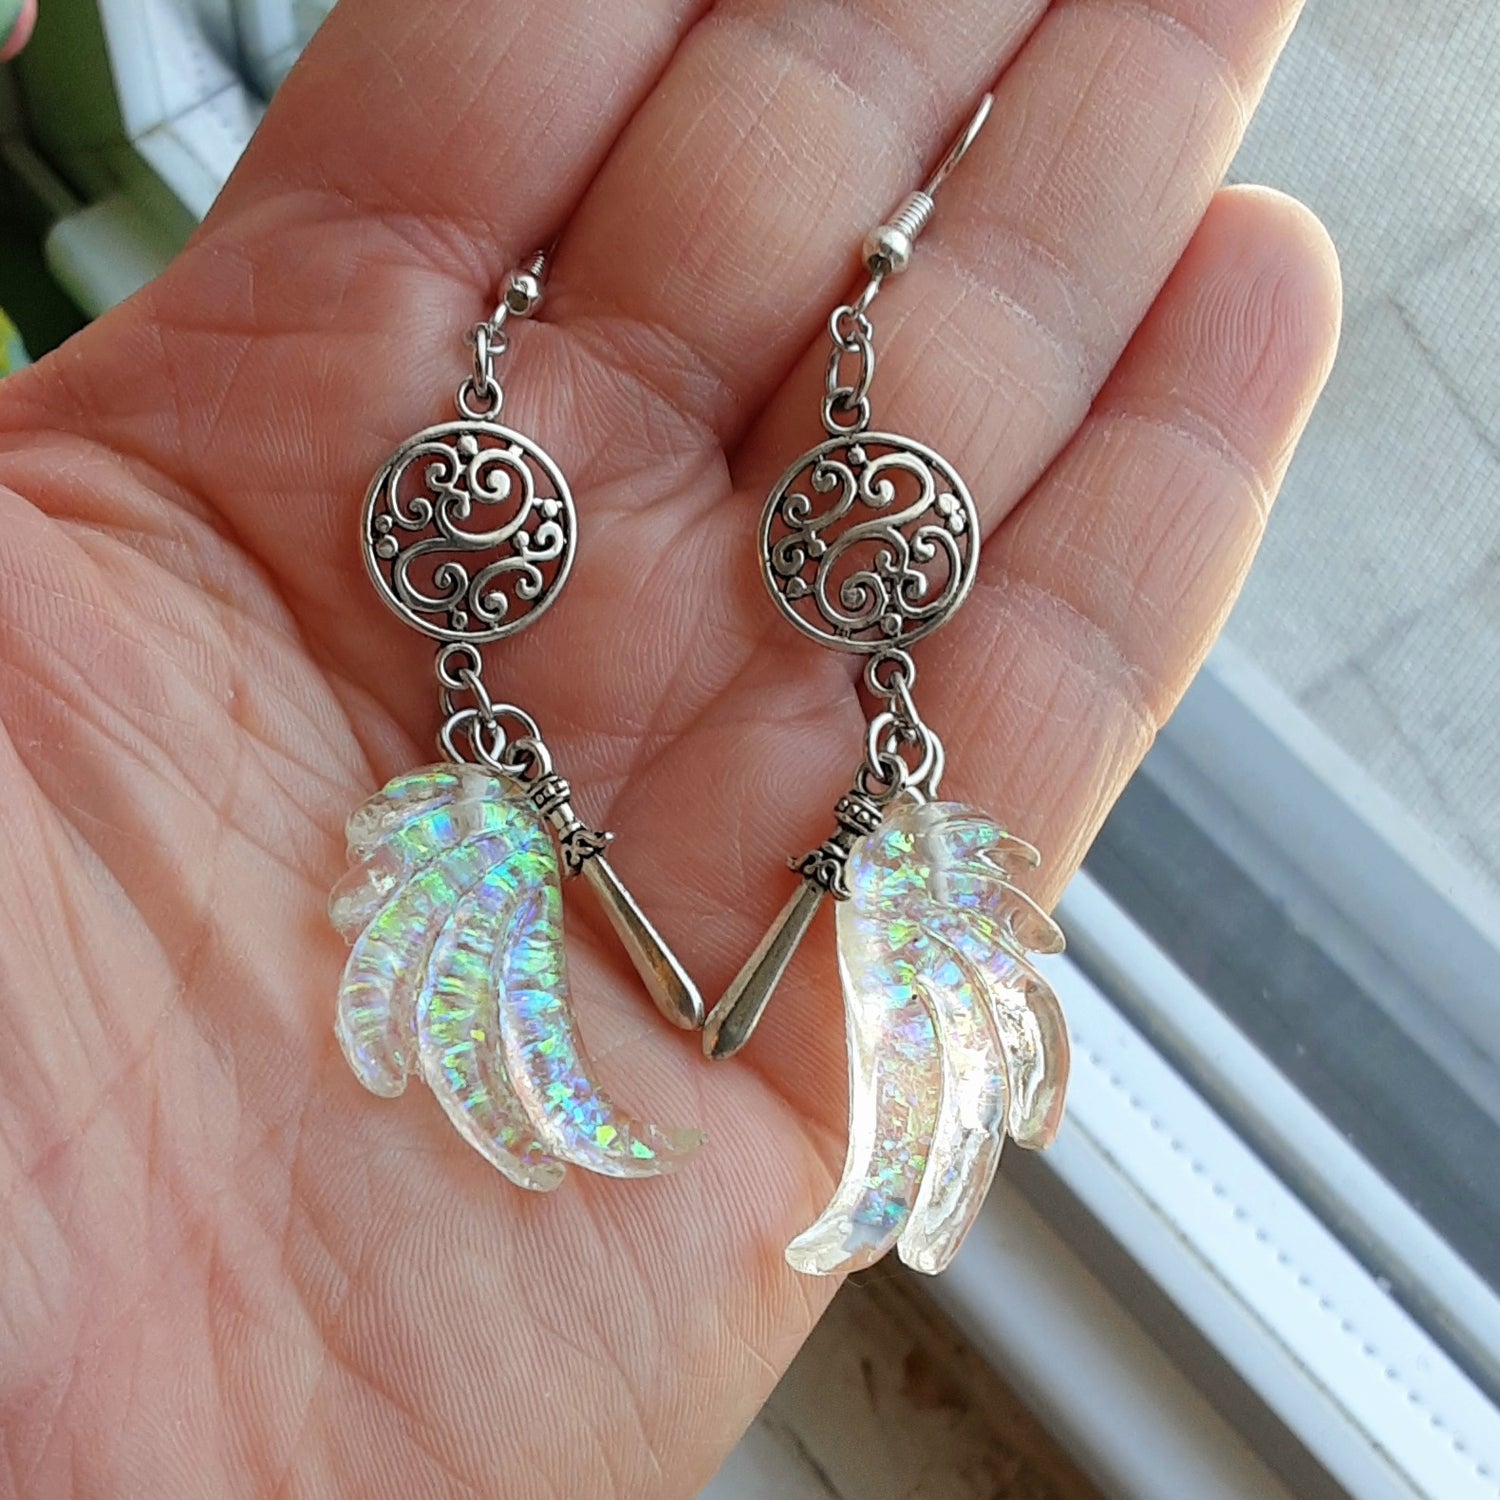 Valkyrie earrings with wings and swords